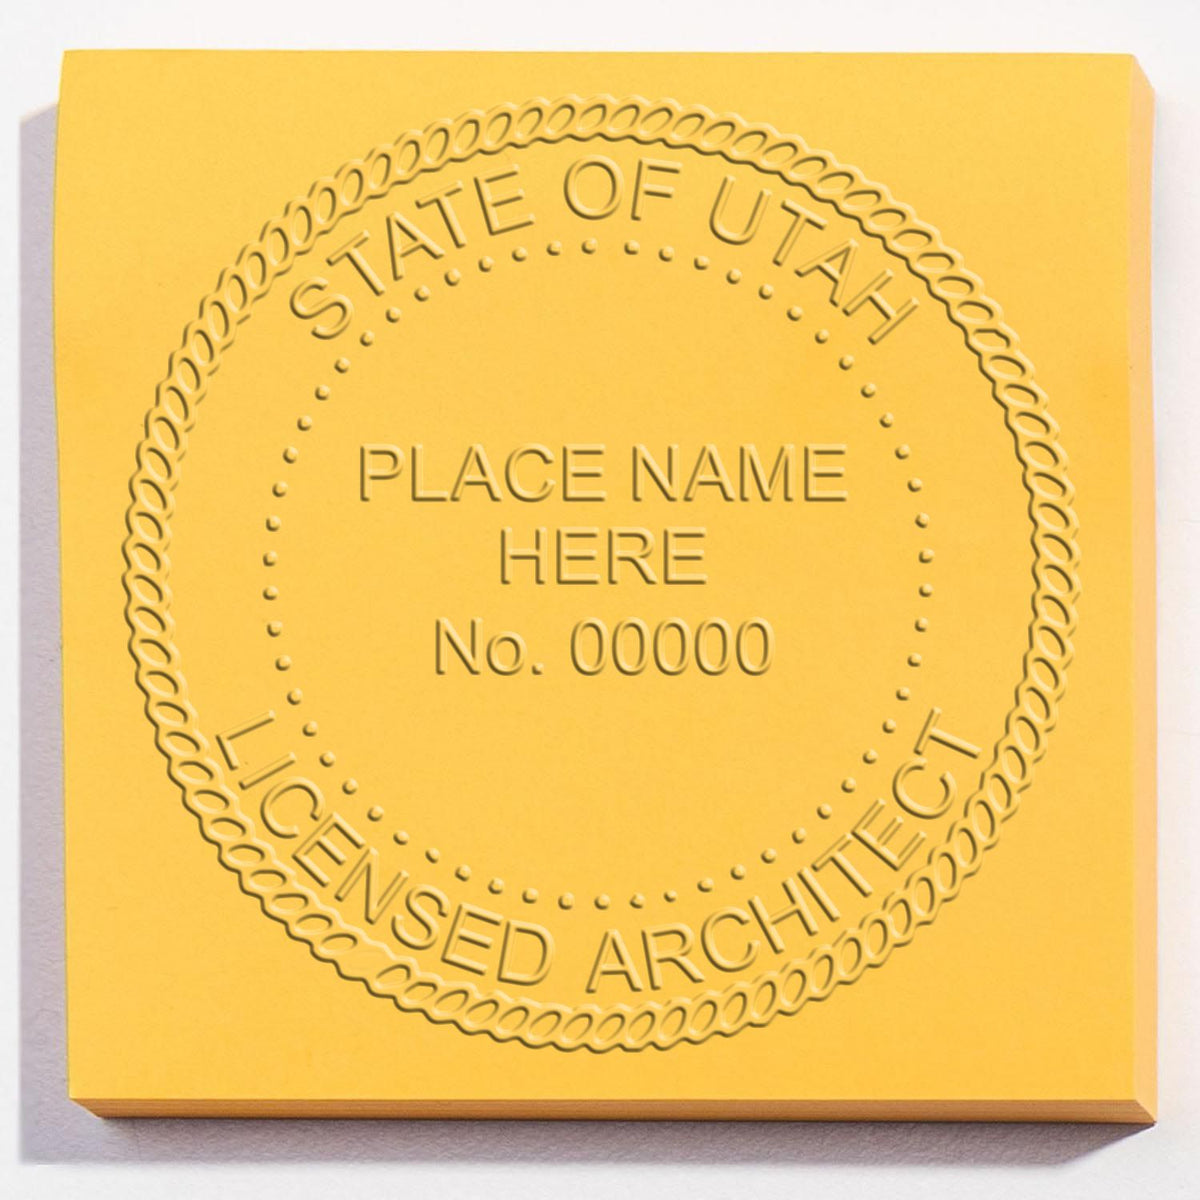 The State of Utah Architectural Seal Embosser stamp impression comes to life with a crisp, detailed photo on paper - showcasing true professional quality.